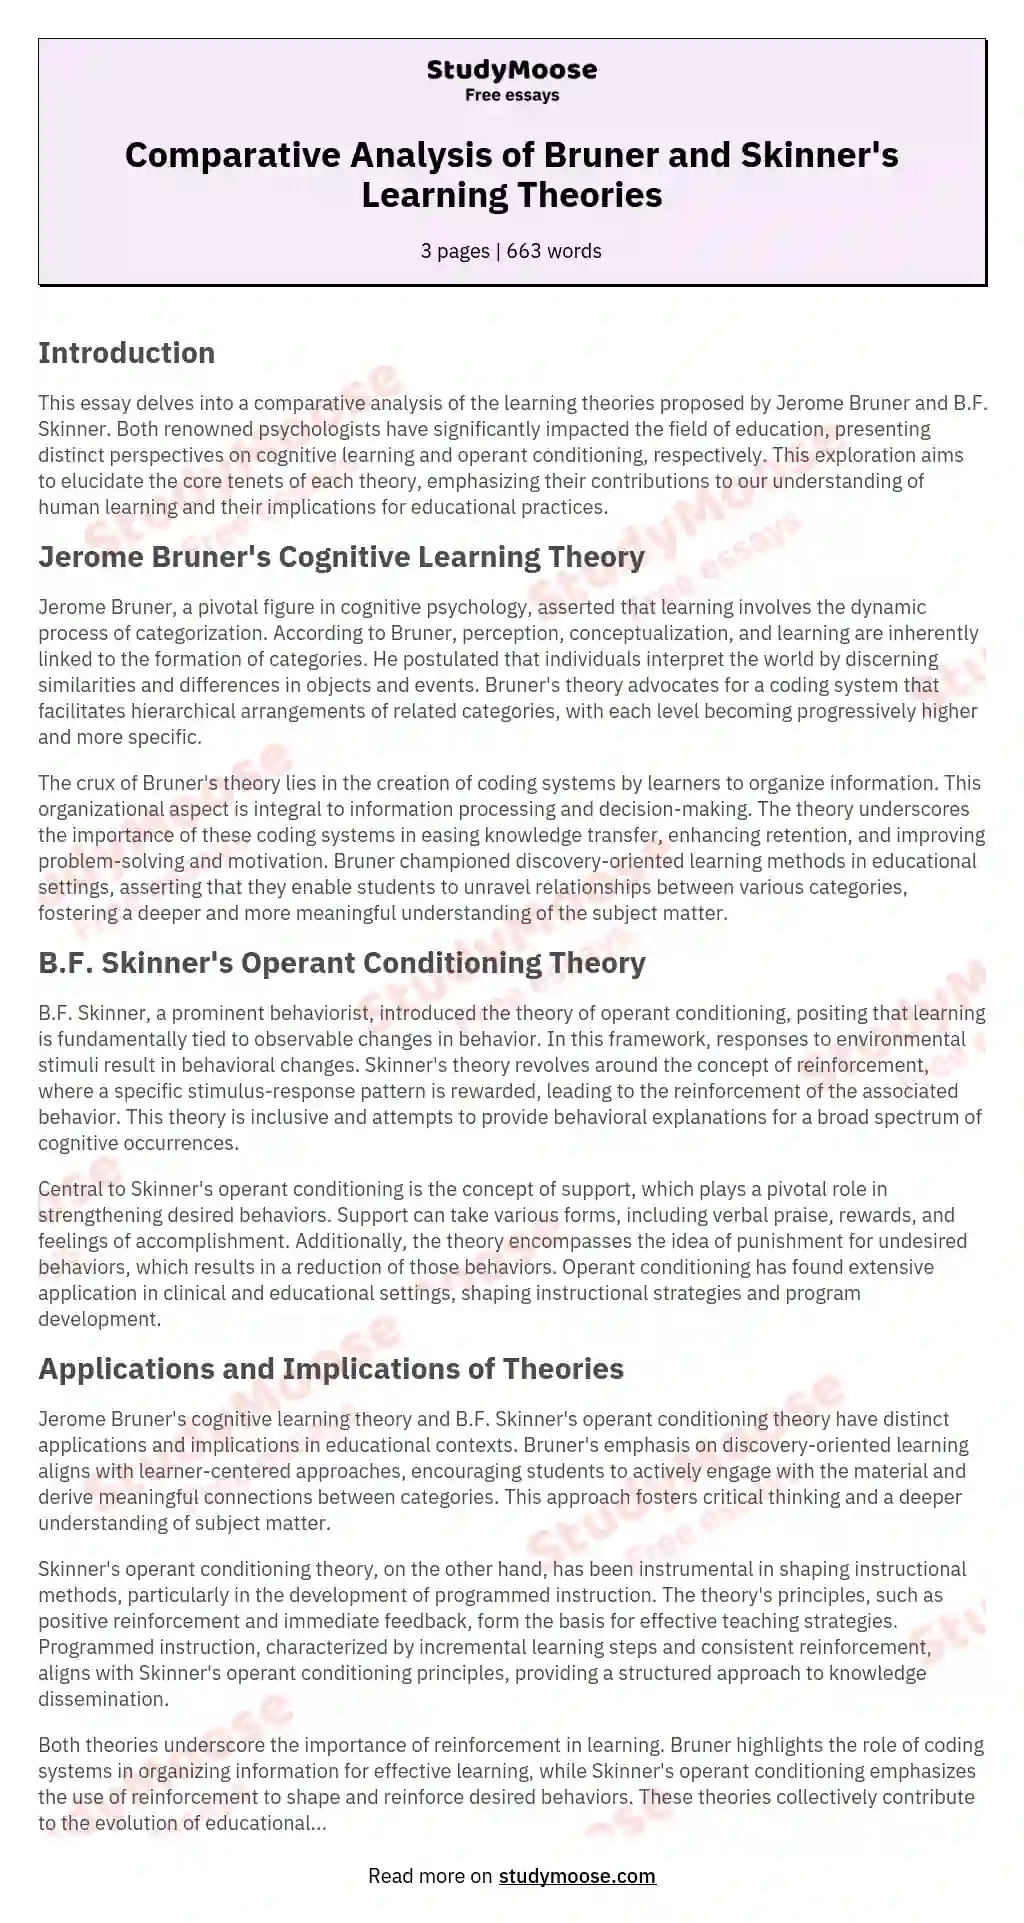 Comparative Analysis of Bruner and Skinner's Learning Theories essay